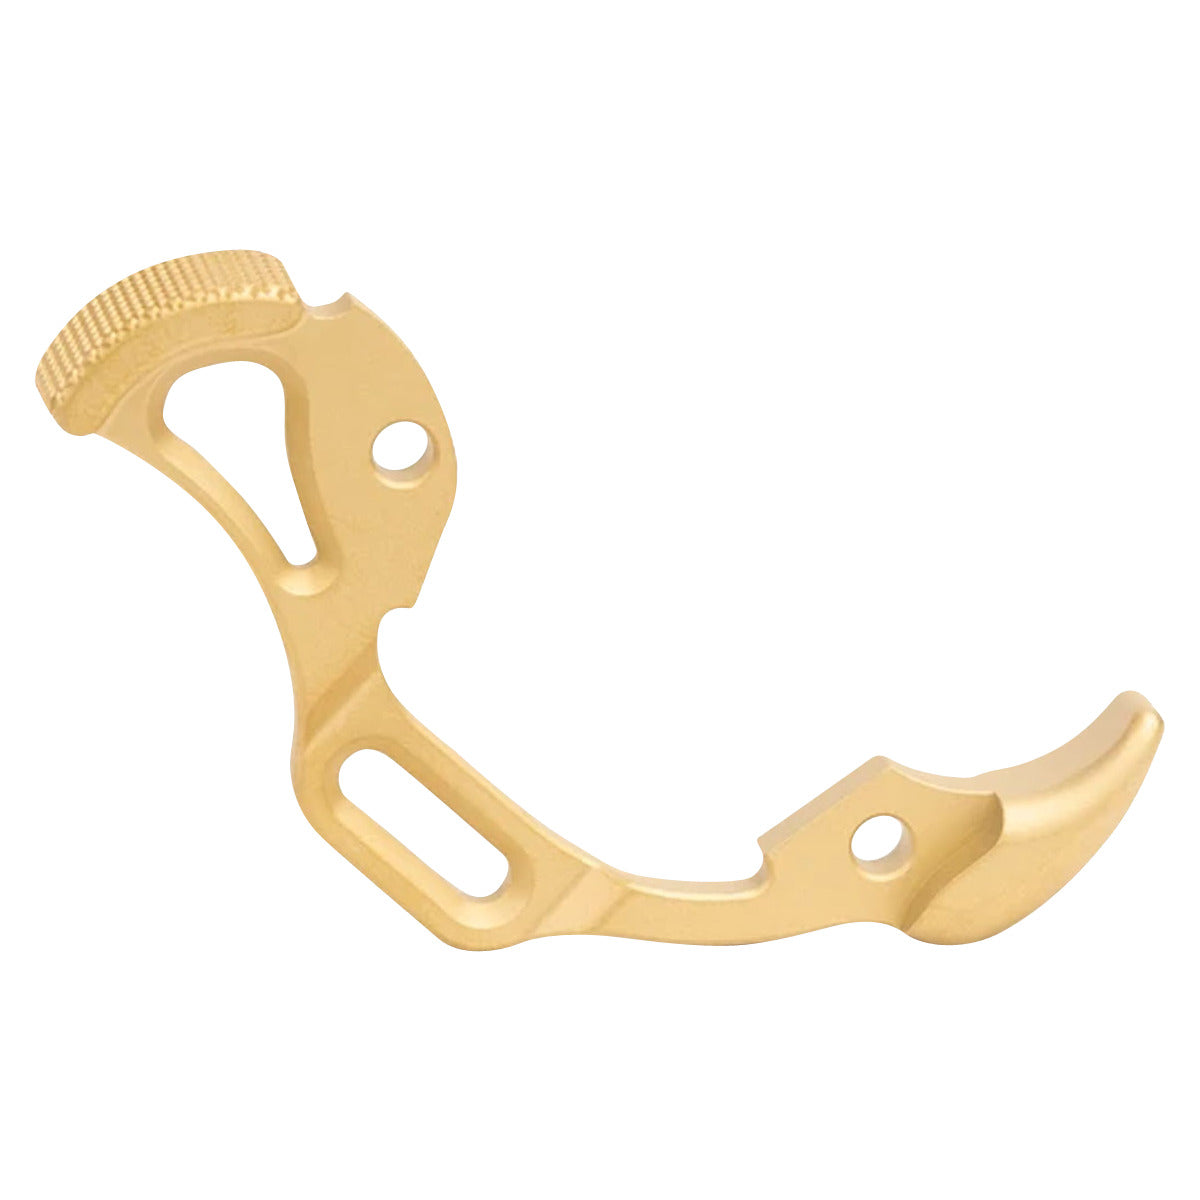 Ultraview Archery The Hinge - Hunting Bracket in  by GOHUNT | Ultraview Archery - GOHUNT Shop